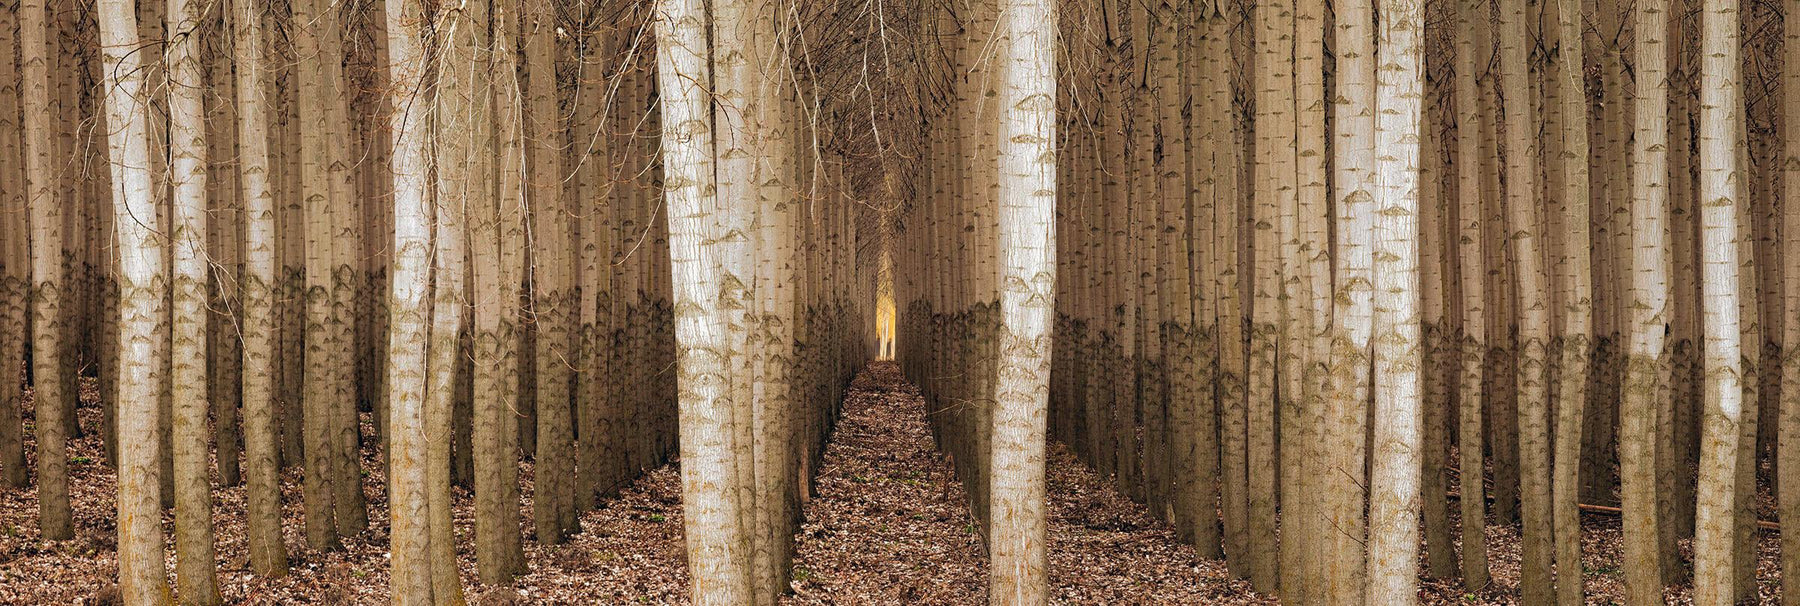 Close up of straight rows of brown and white poplar trees in Boardman Oregon